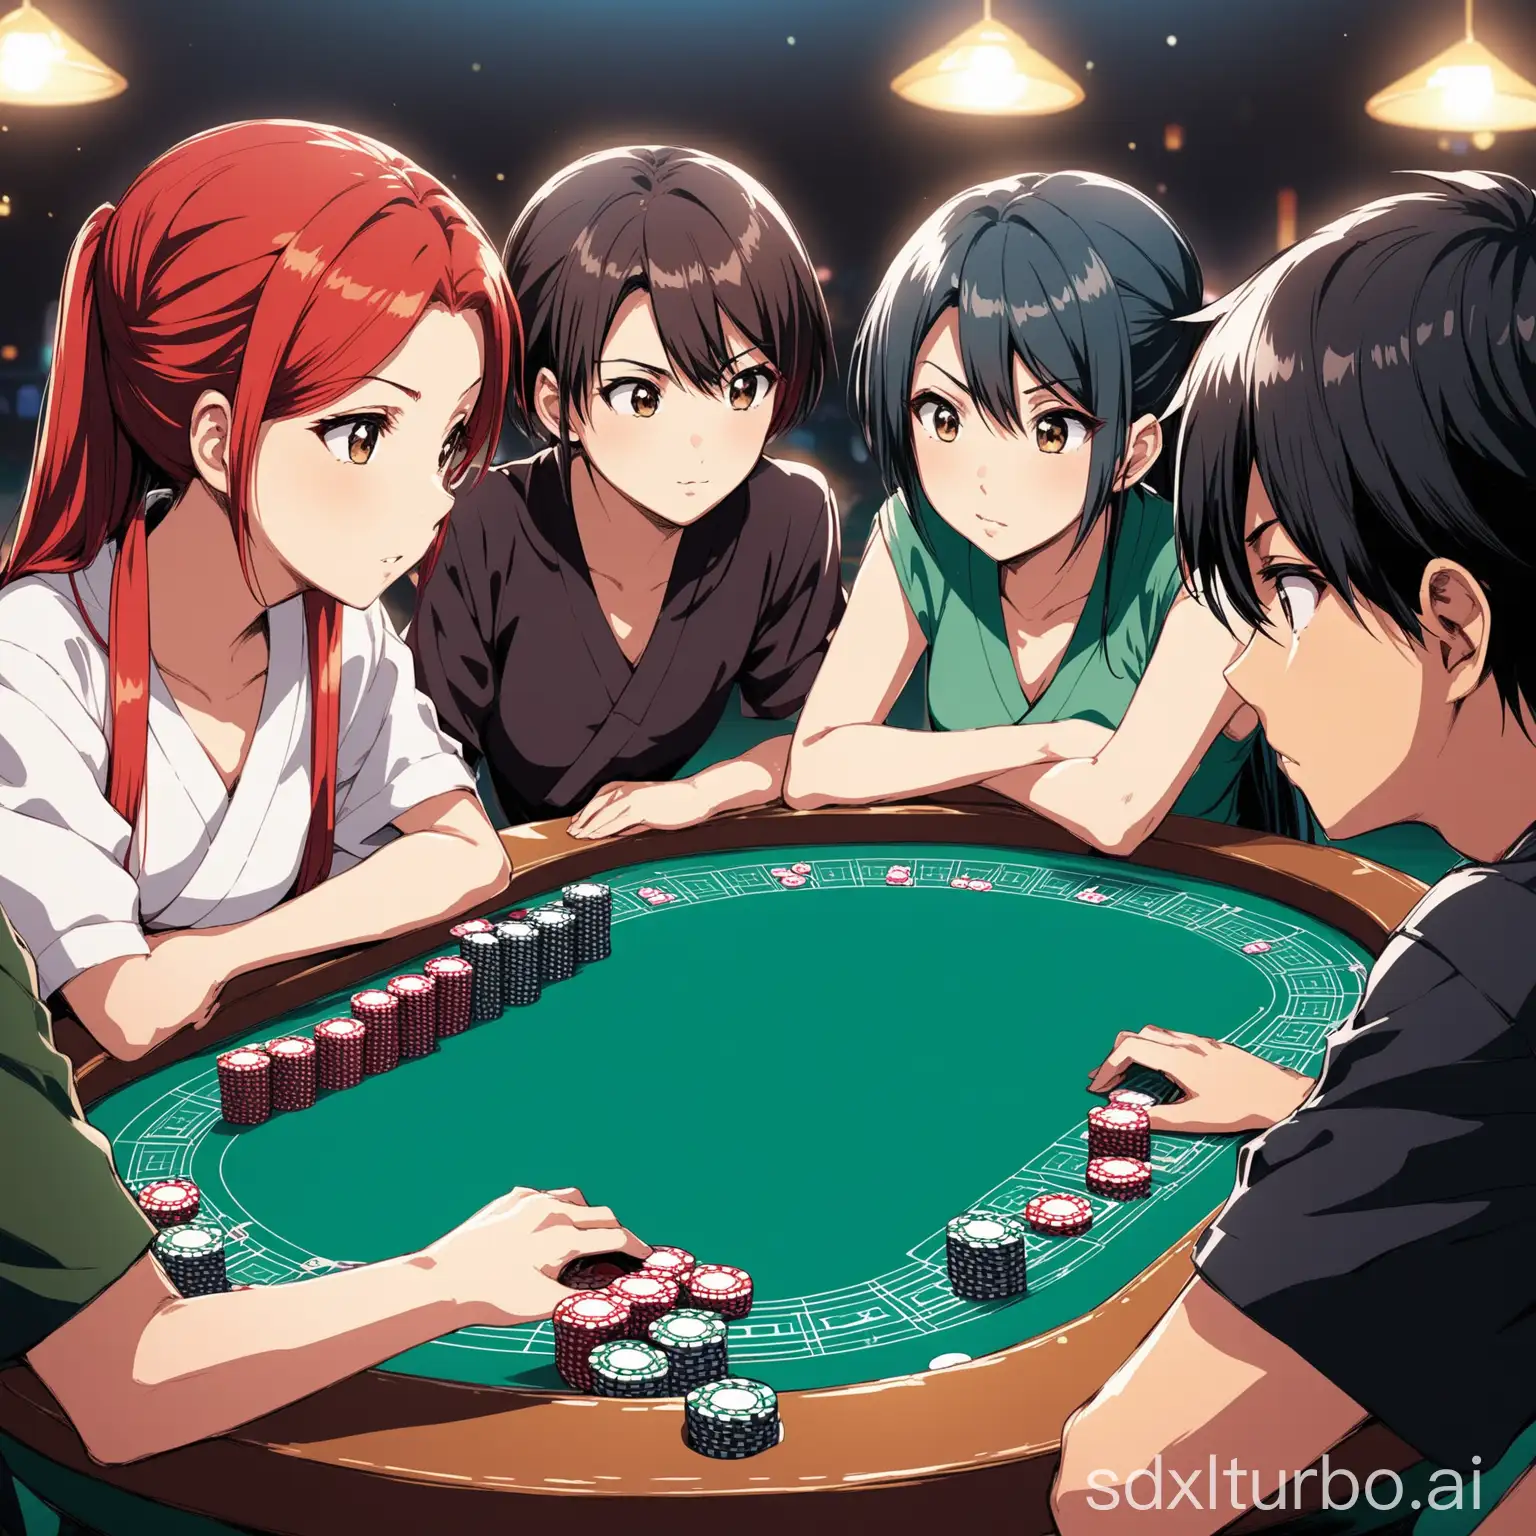 Young people contemplating their bets on a large poker board, in the style of Japanese anime.